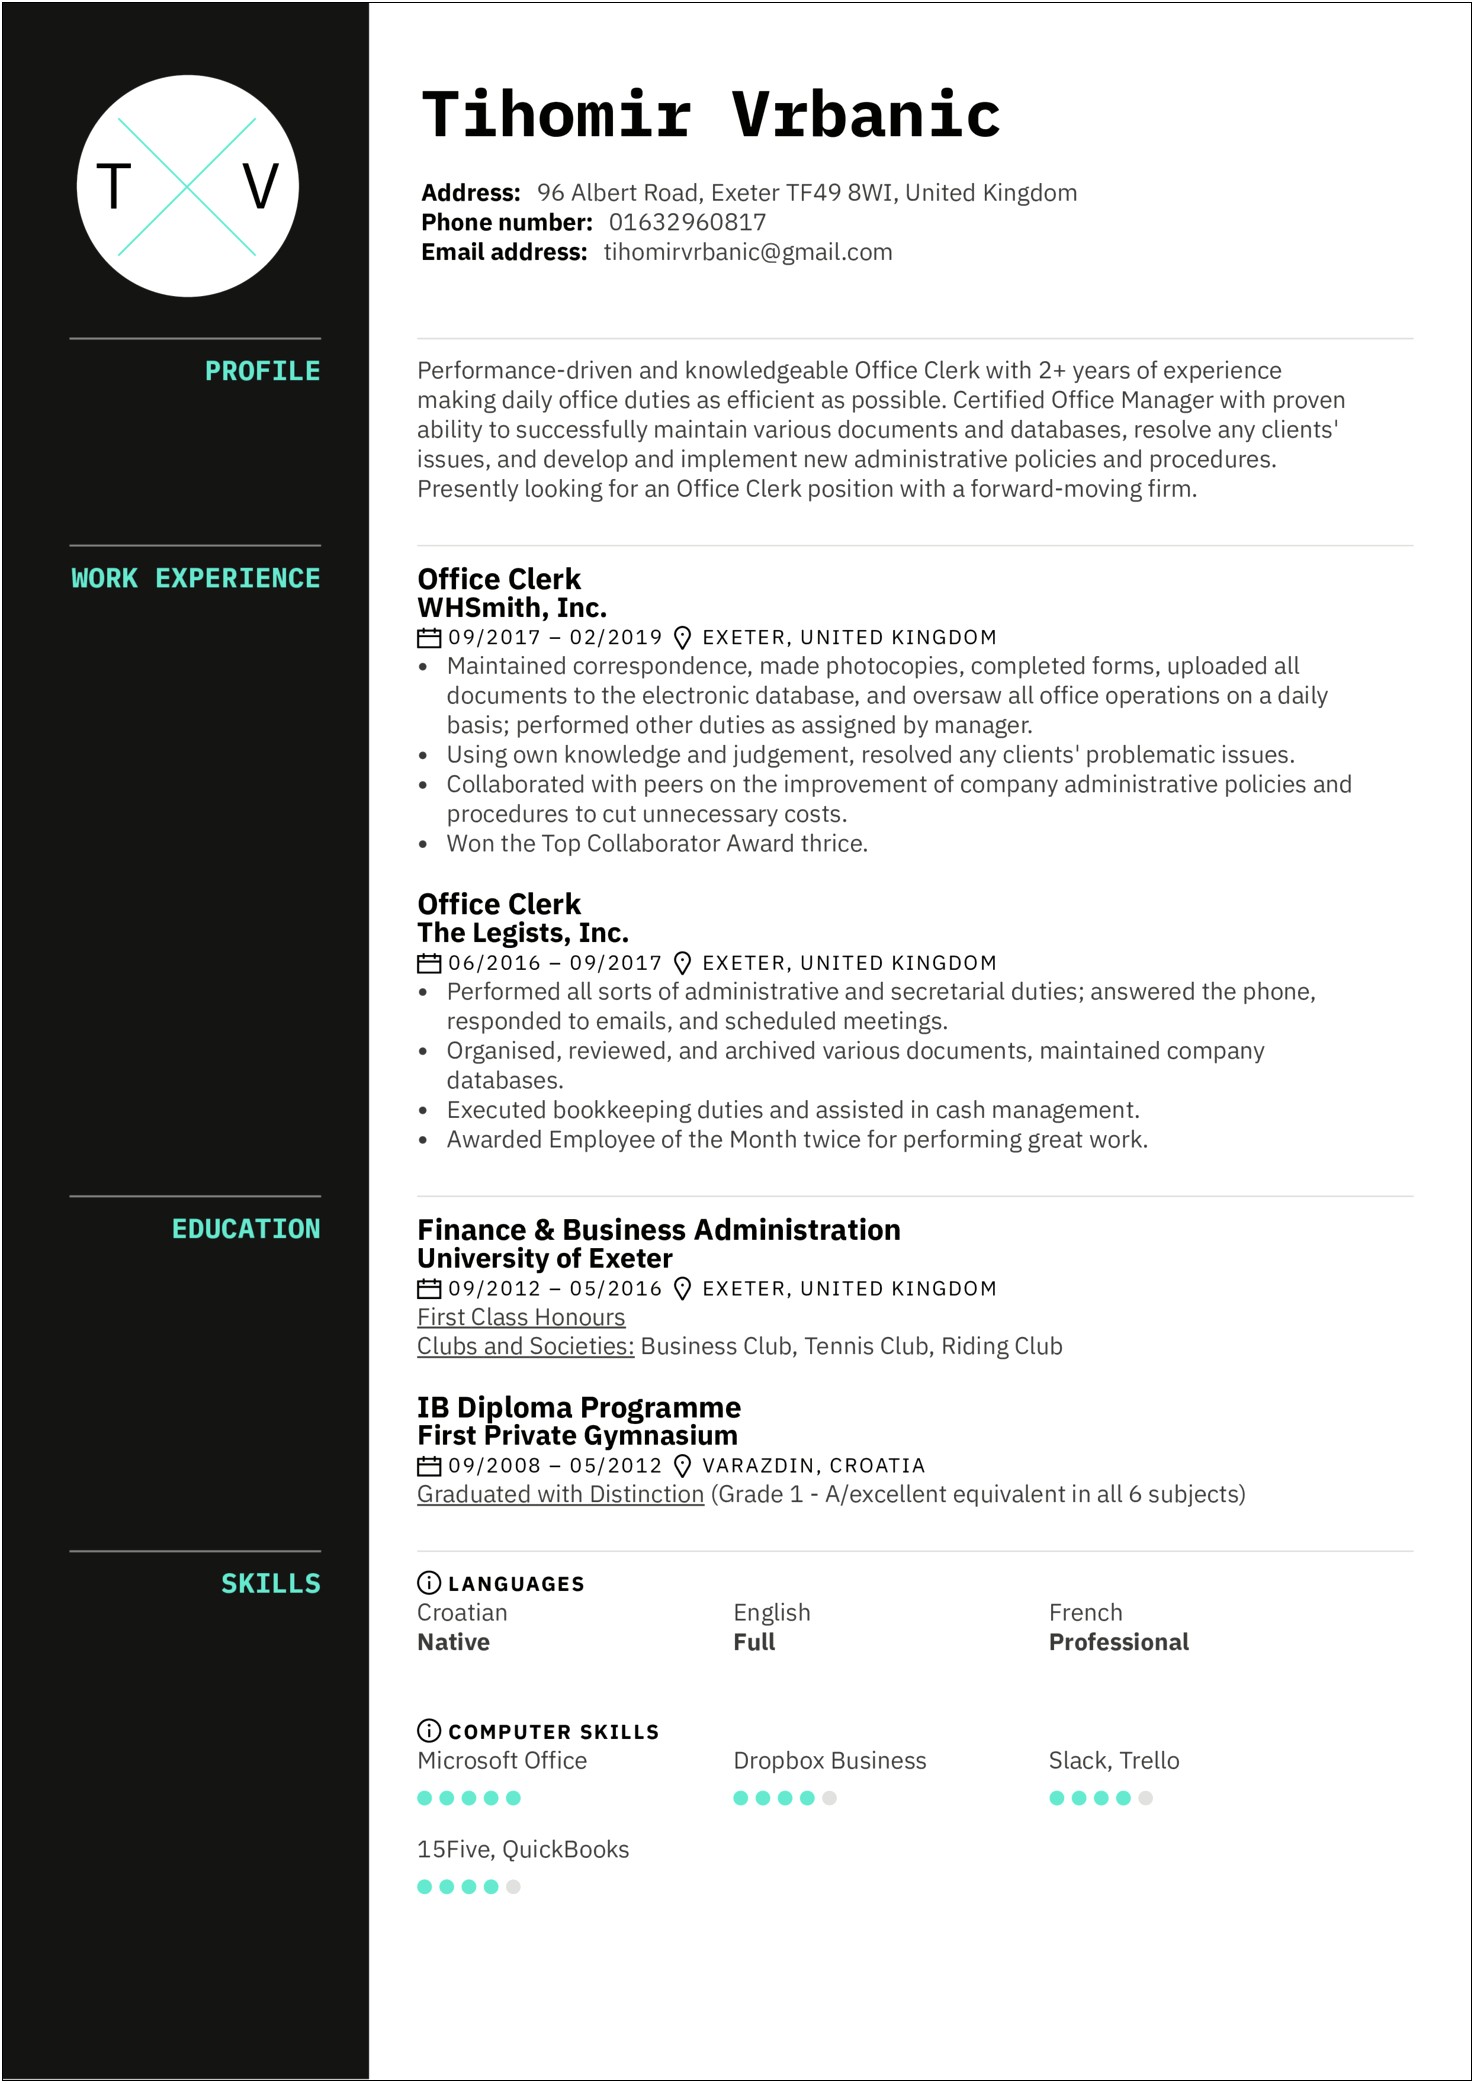 Objective For Judicial Clerk Resume